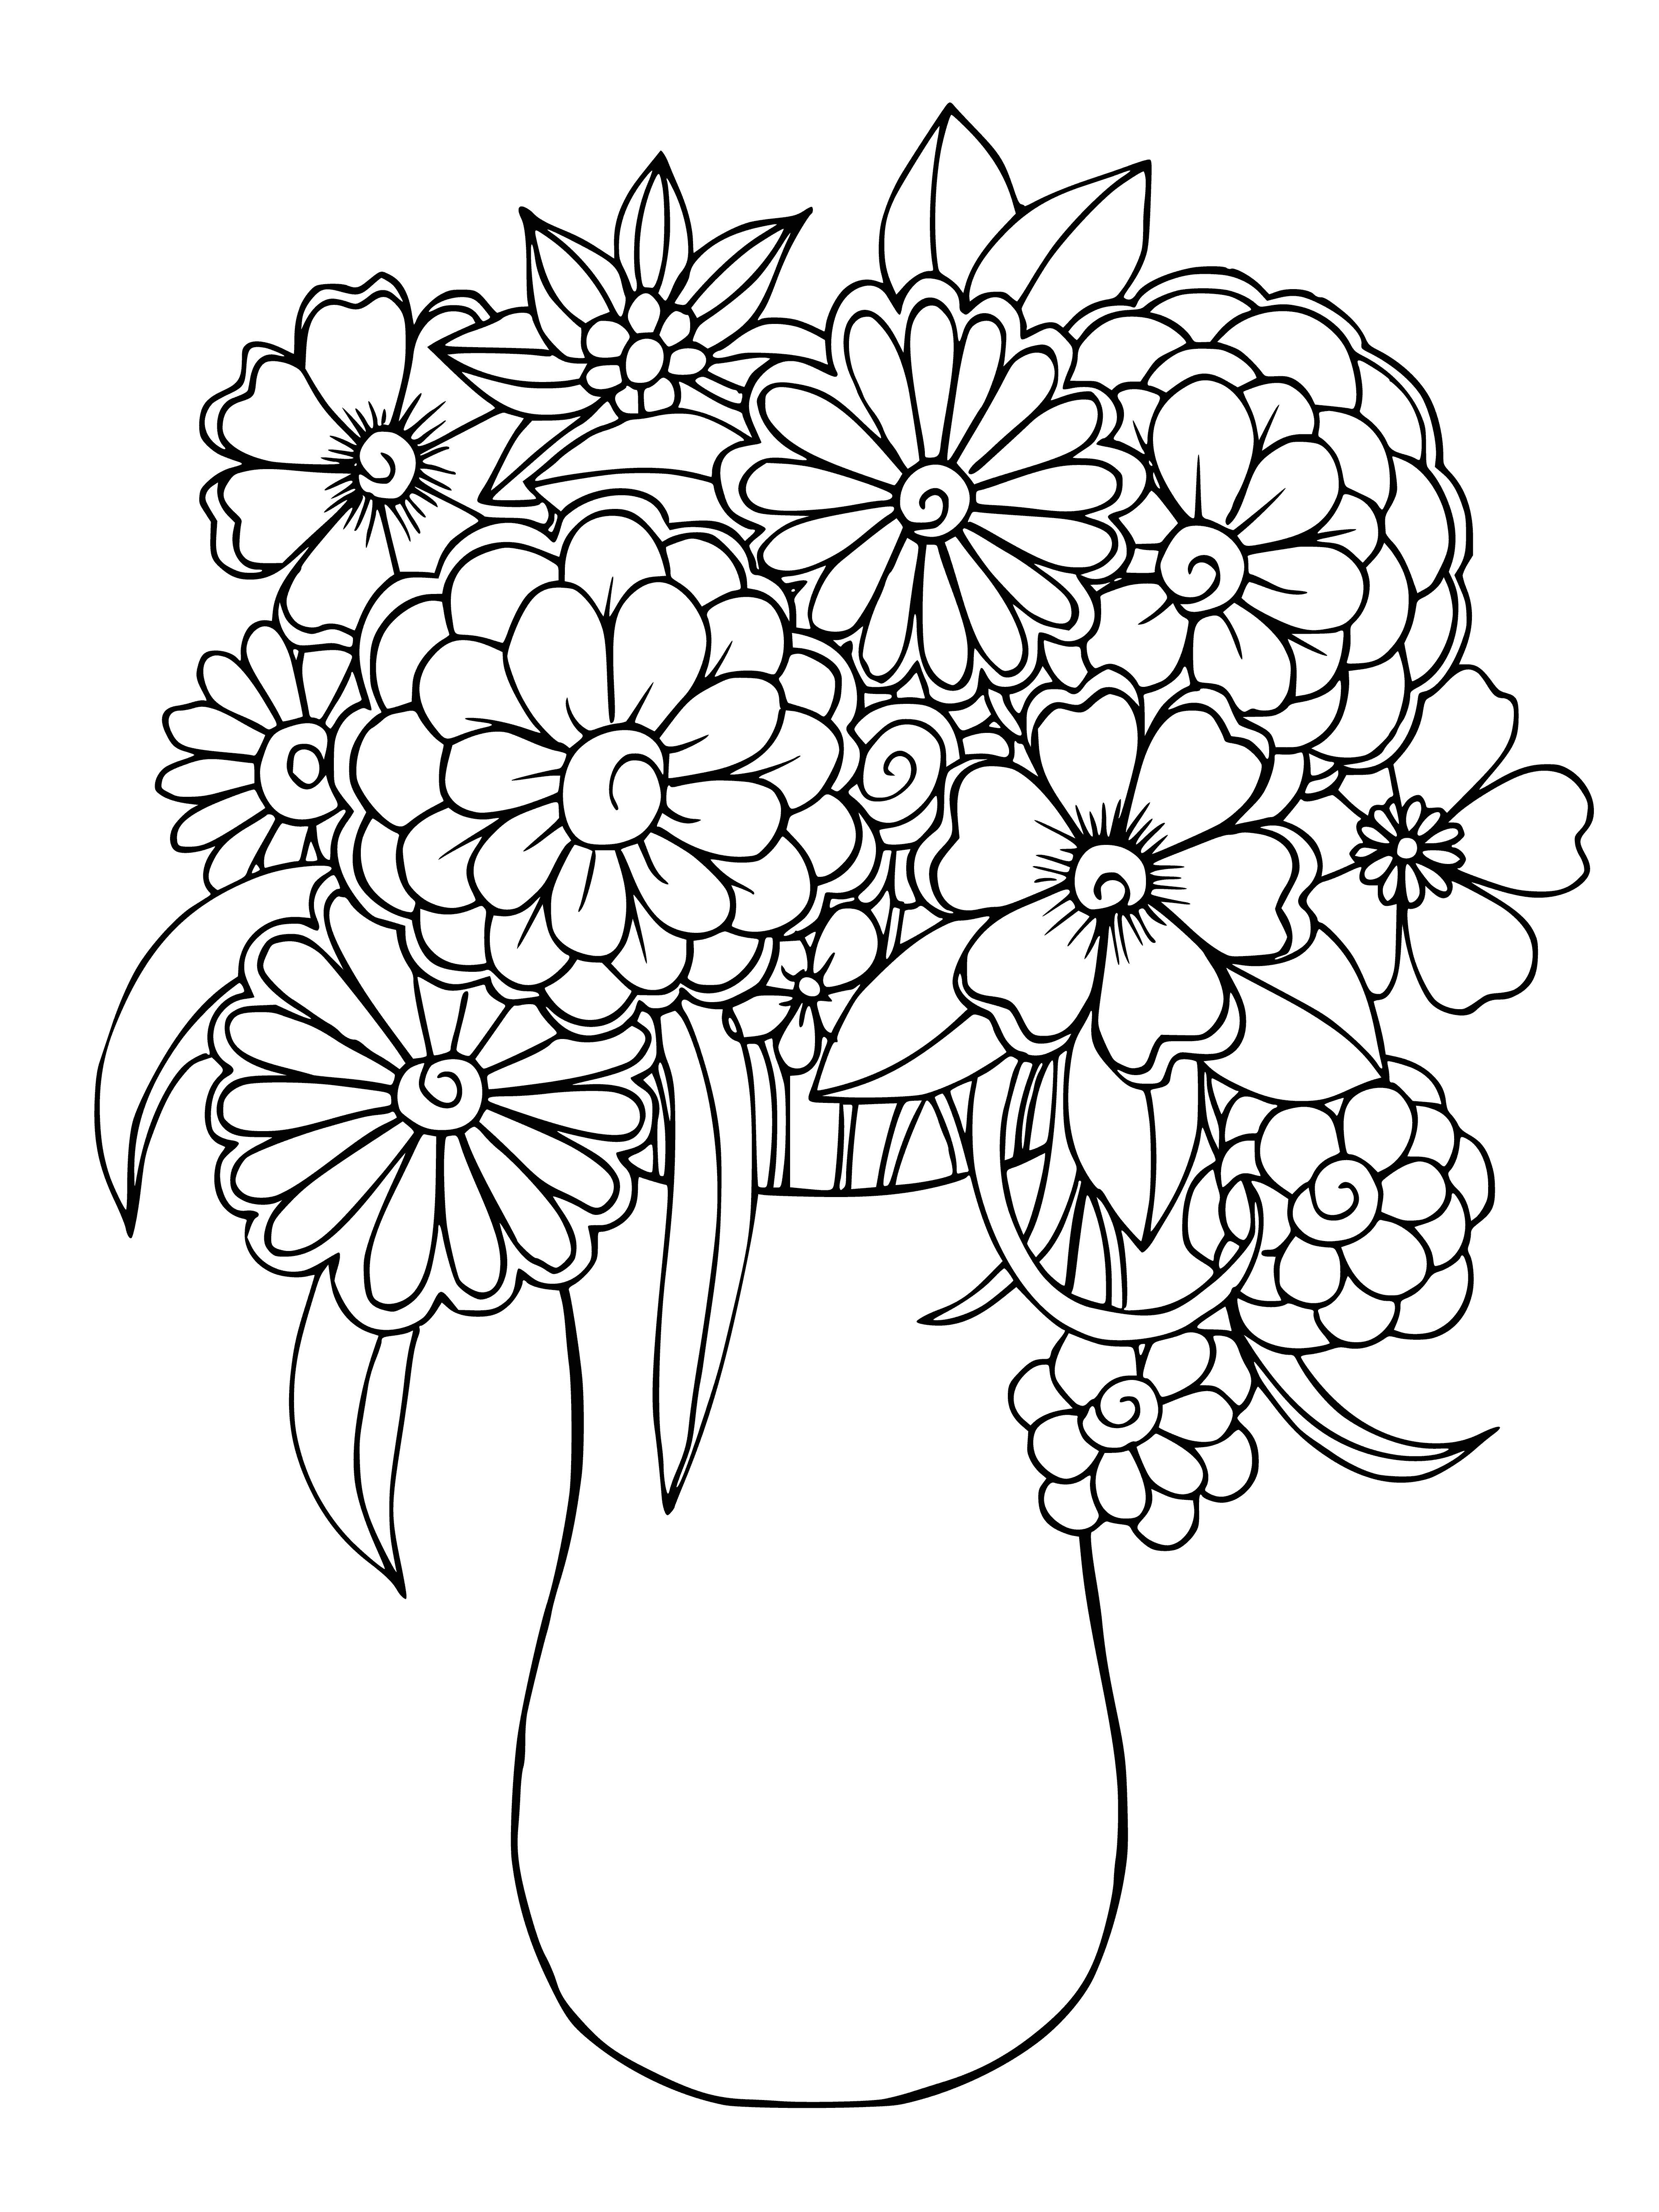 coloring page: A vibrant bouquet of different flowers overflows a vase, set in a calming background of blues, greens, and purples.